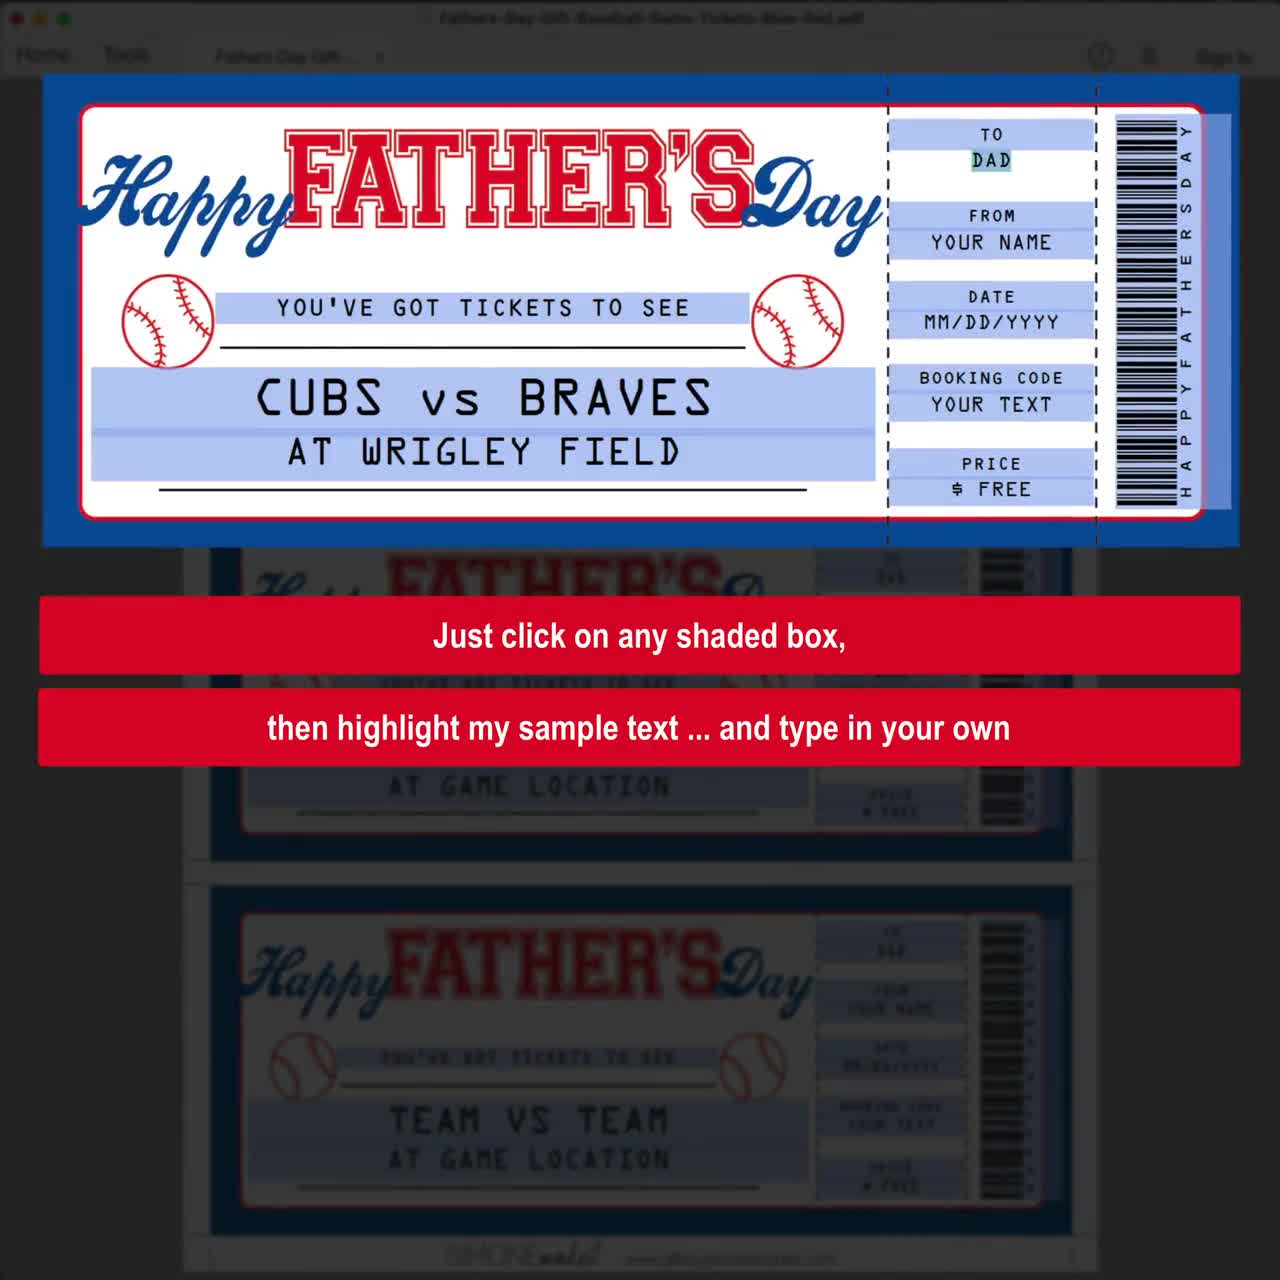 Baseball Game Ticket Printable Gift - Surprise Ticket to a Baseball Game  Voucher Certificate - Any Occasion - INSTANT DOWNLOAD - EDITABLE